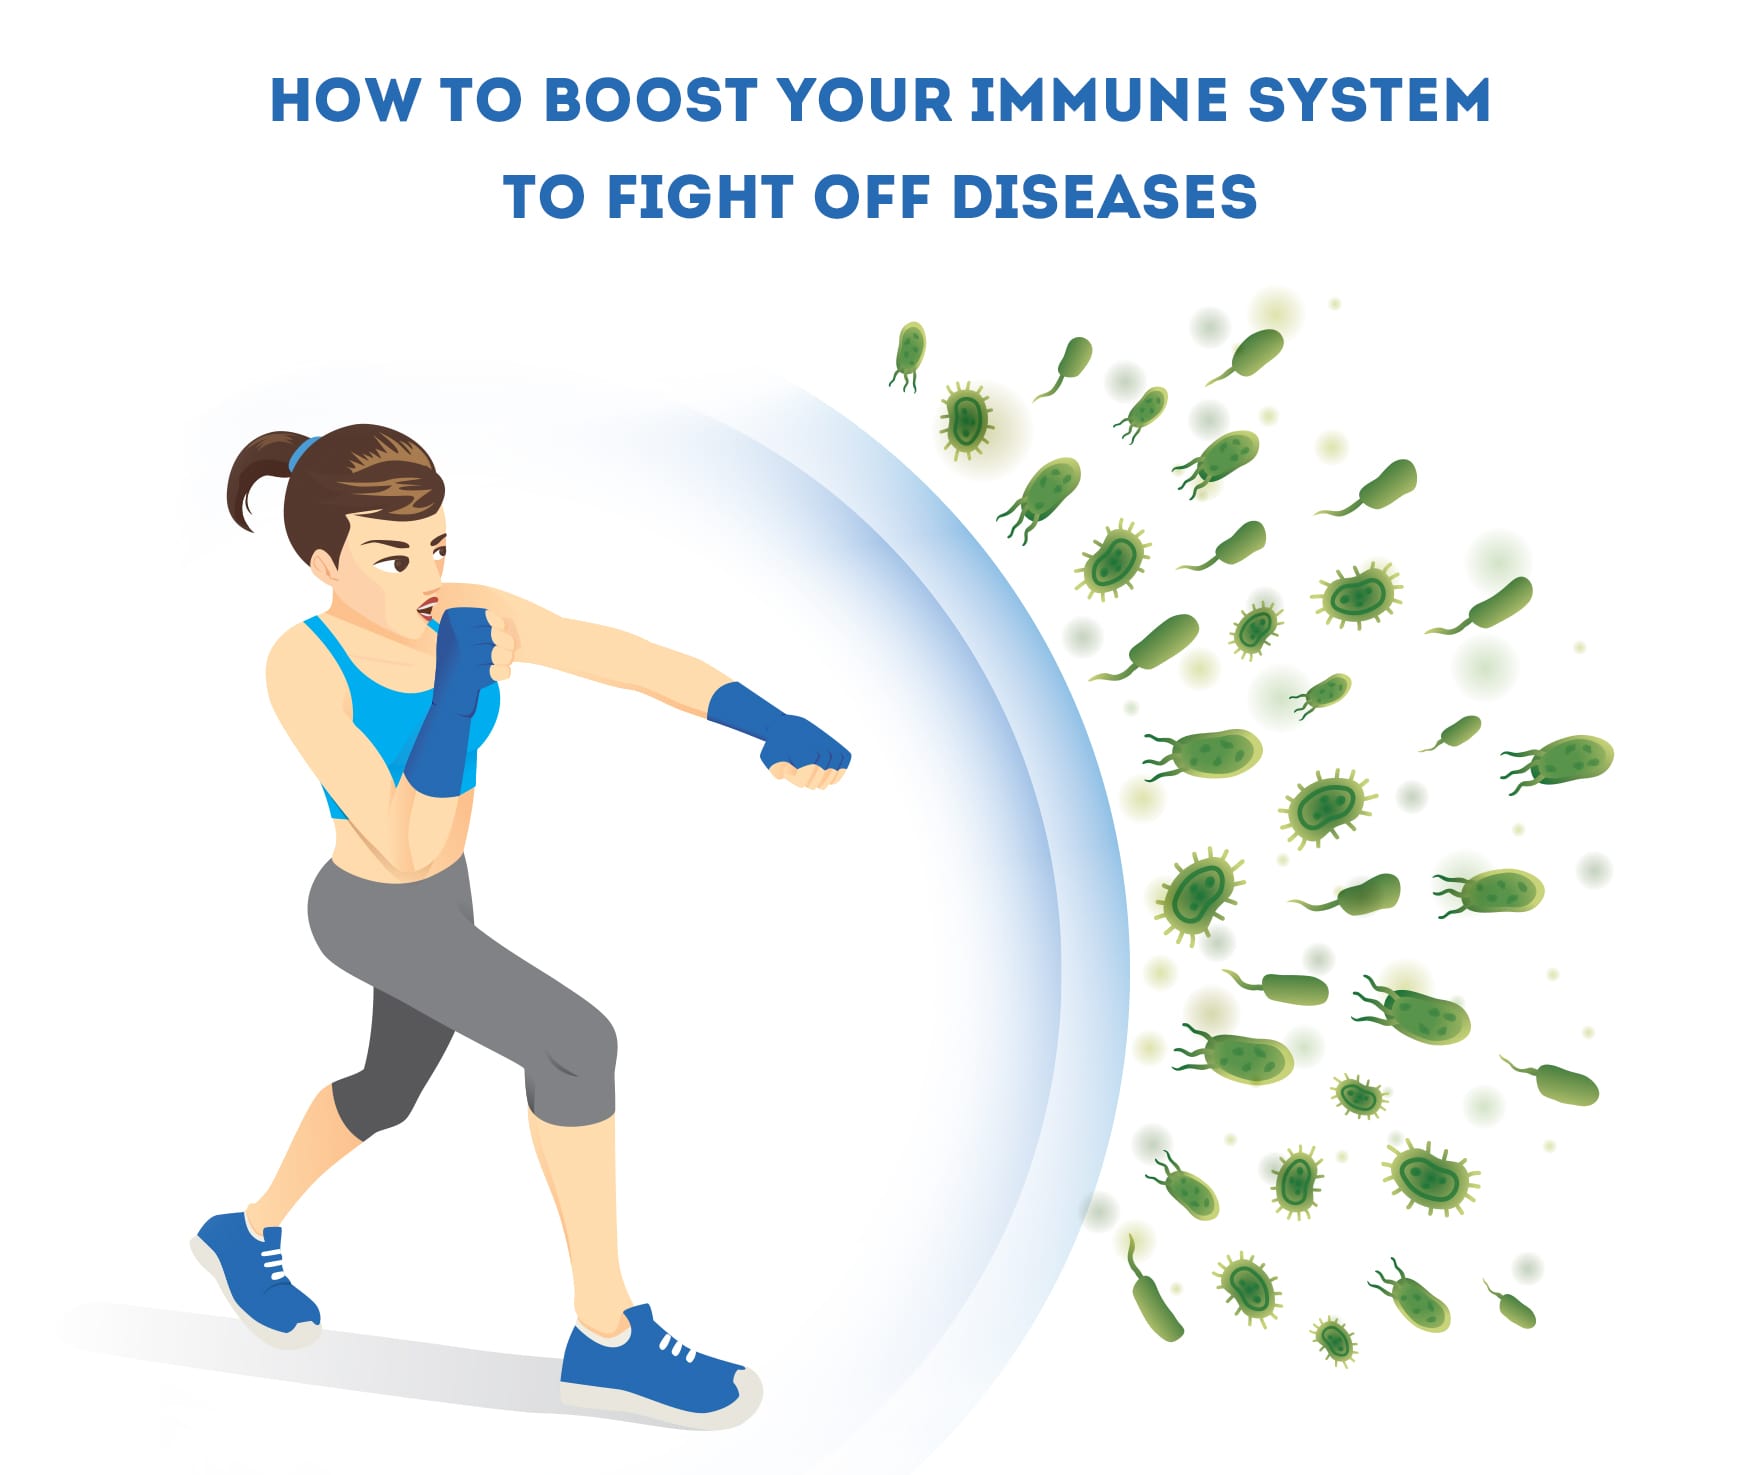 How to Boost Your Immune System to Fight Off Diseases